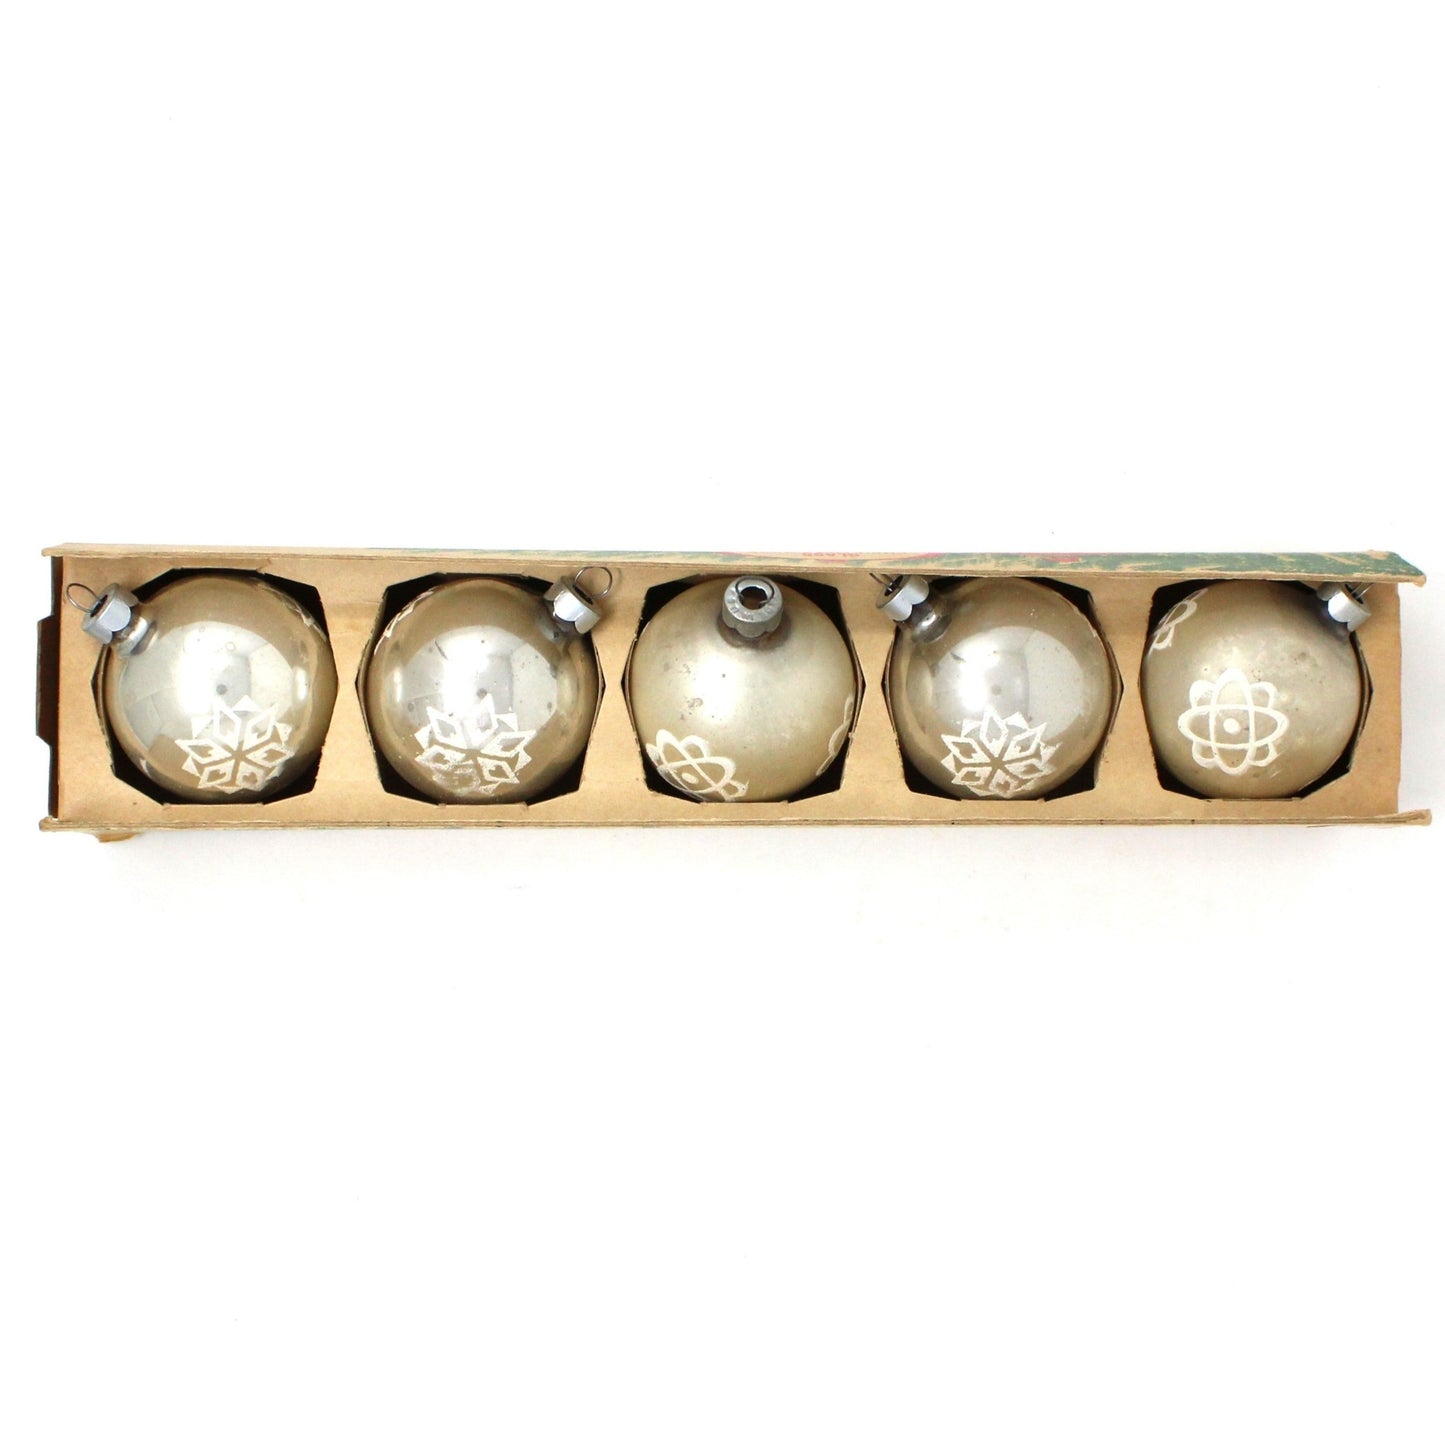 Ornament, Christmas Glass Ball, Shiny Brite, Silver with White Mica, Set of 5 in Original Tray Box, Vintage